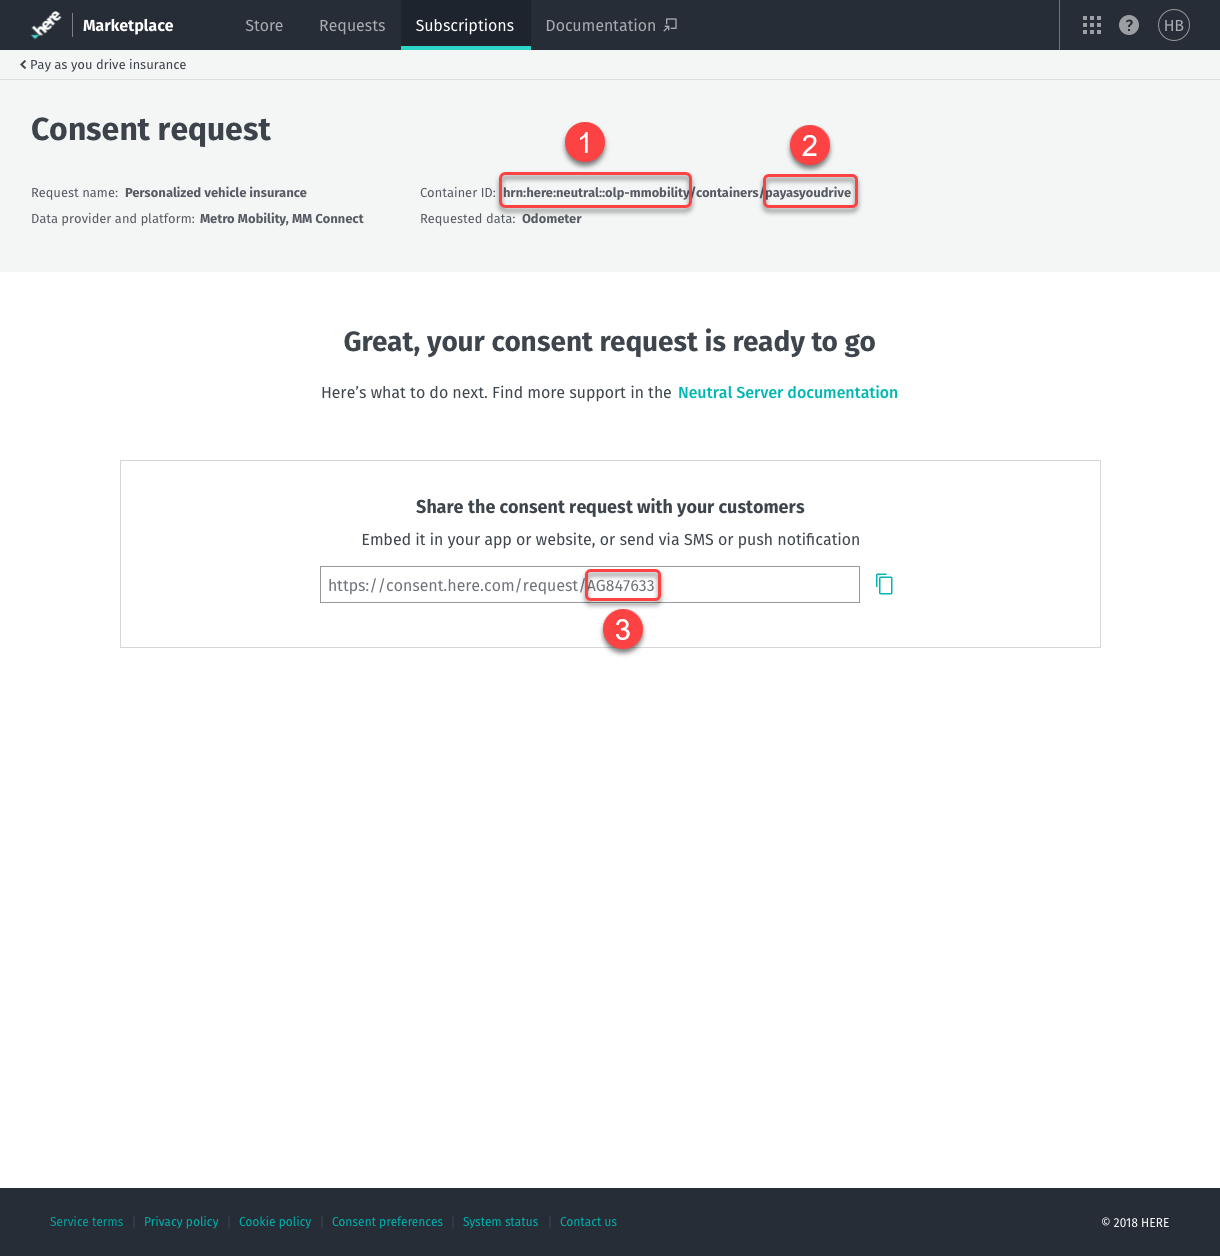 A consent request page with Provider HRN, Container ID, and Consent Request ID